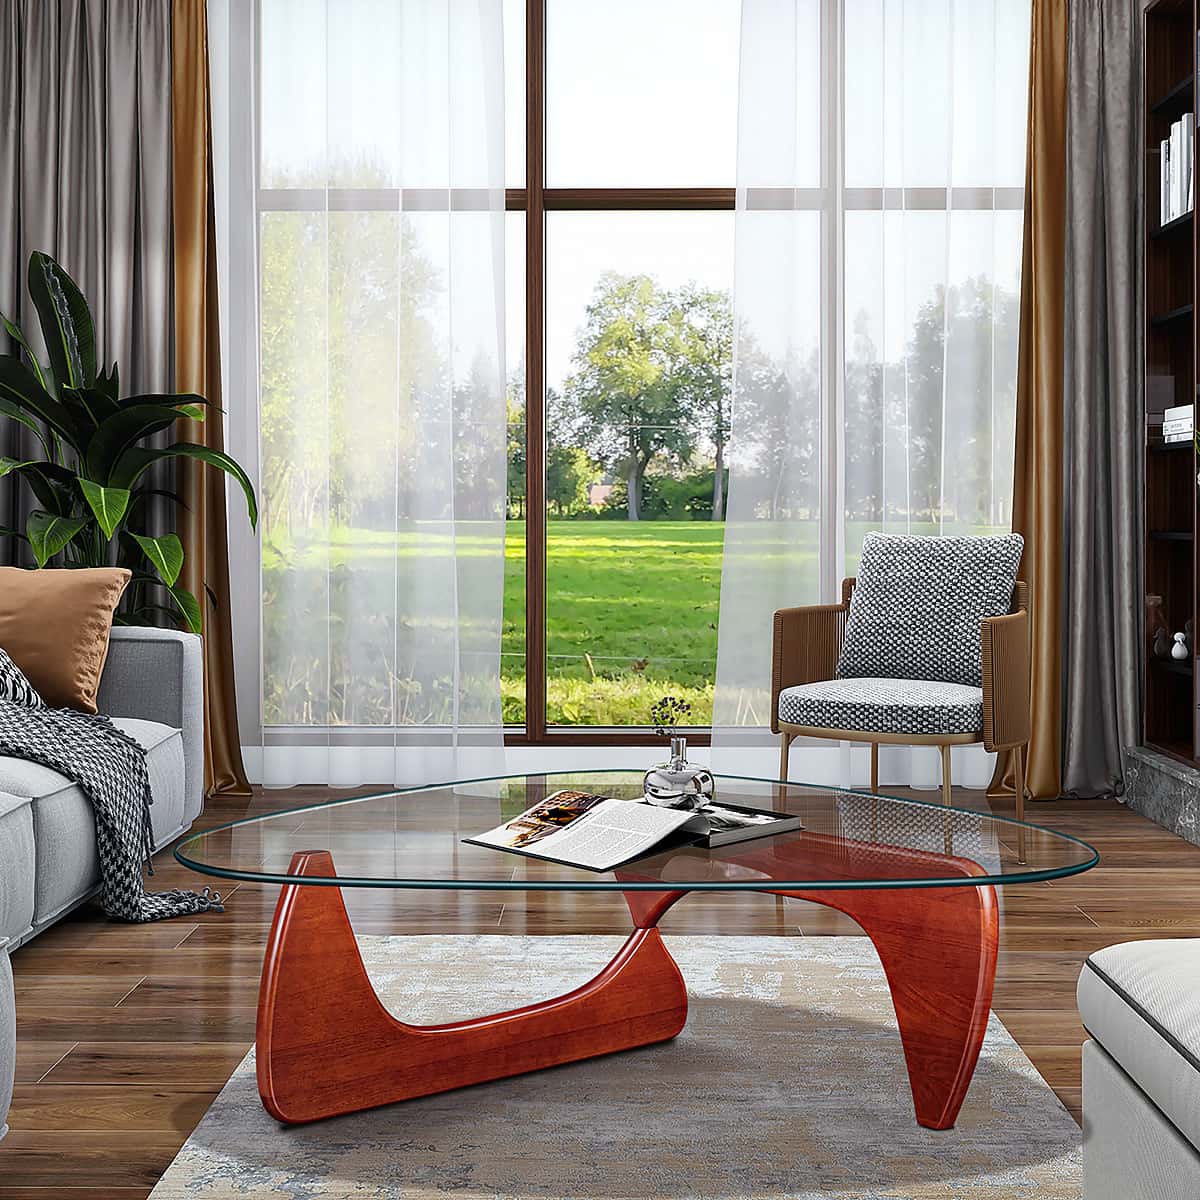 7 Reasons to Choose a Noguchi Coffee Table for Your Space